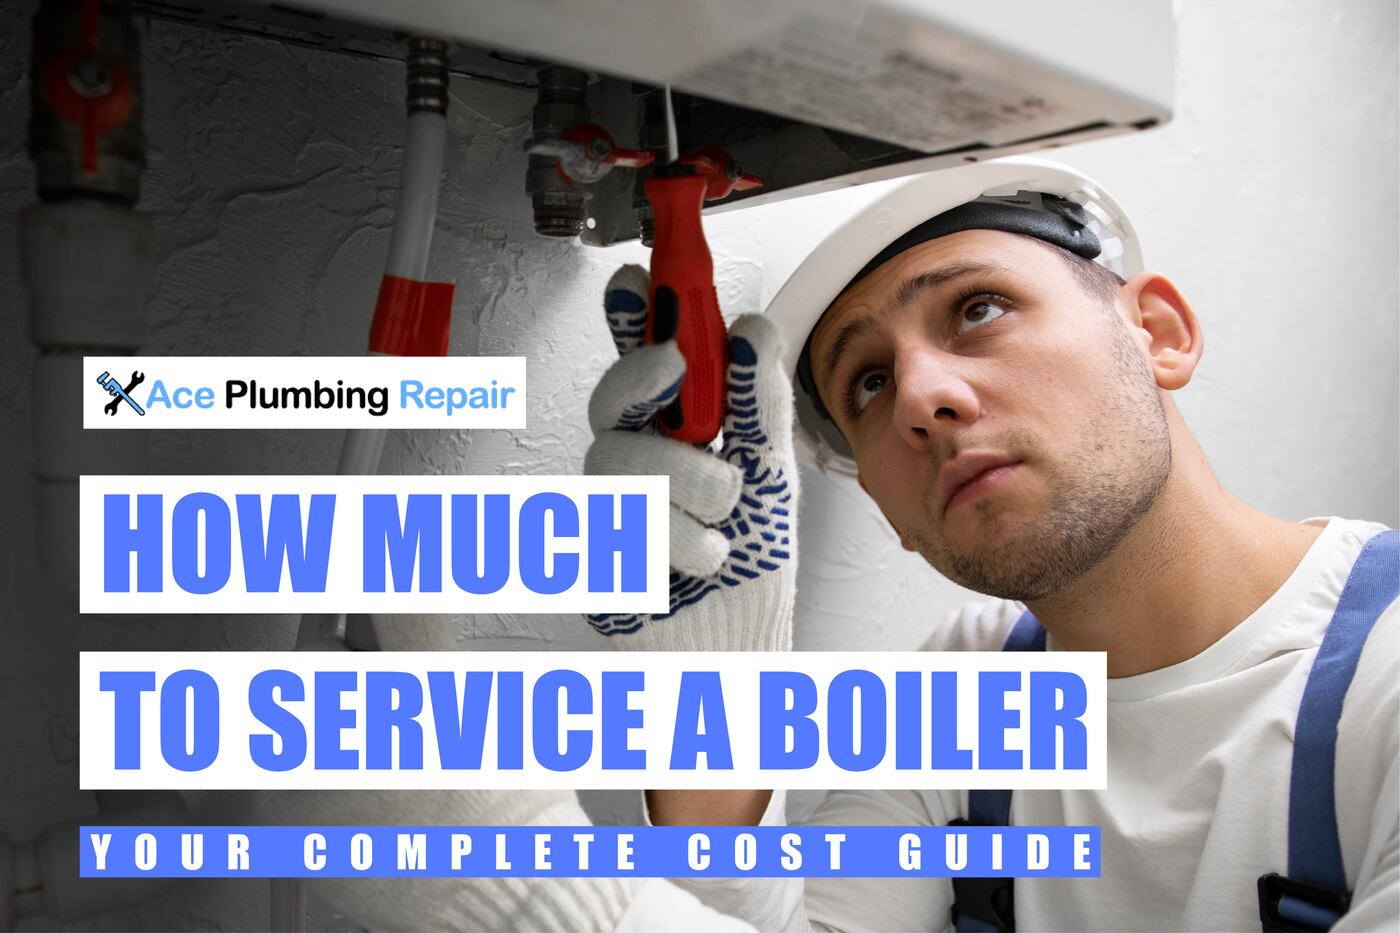 How much to service a boiler?